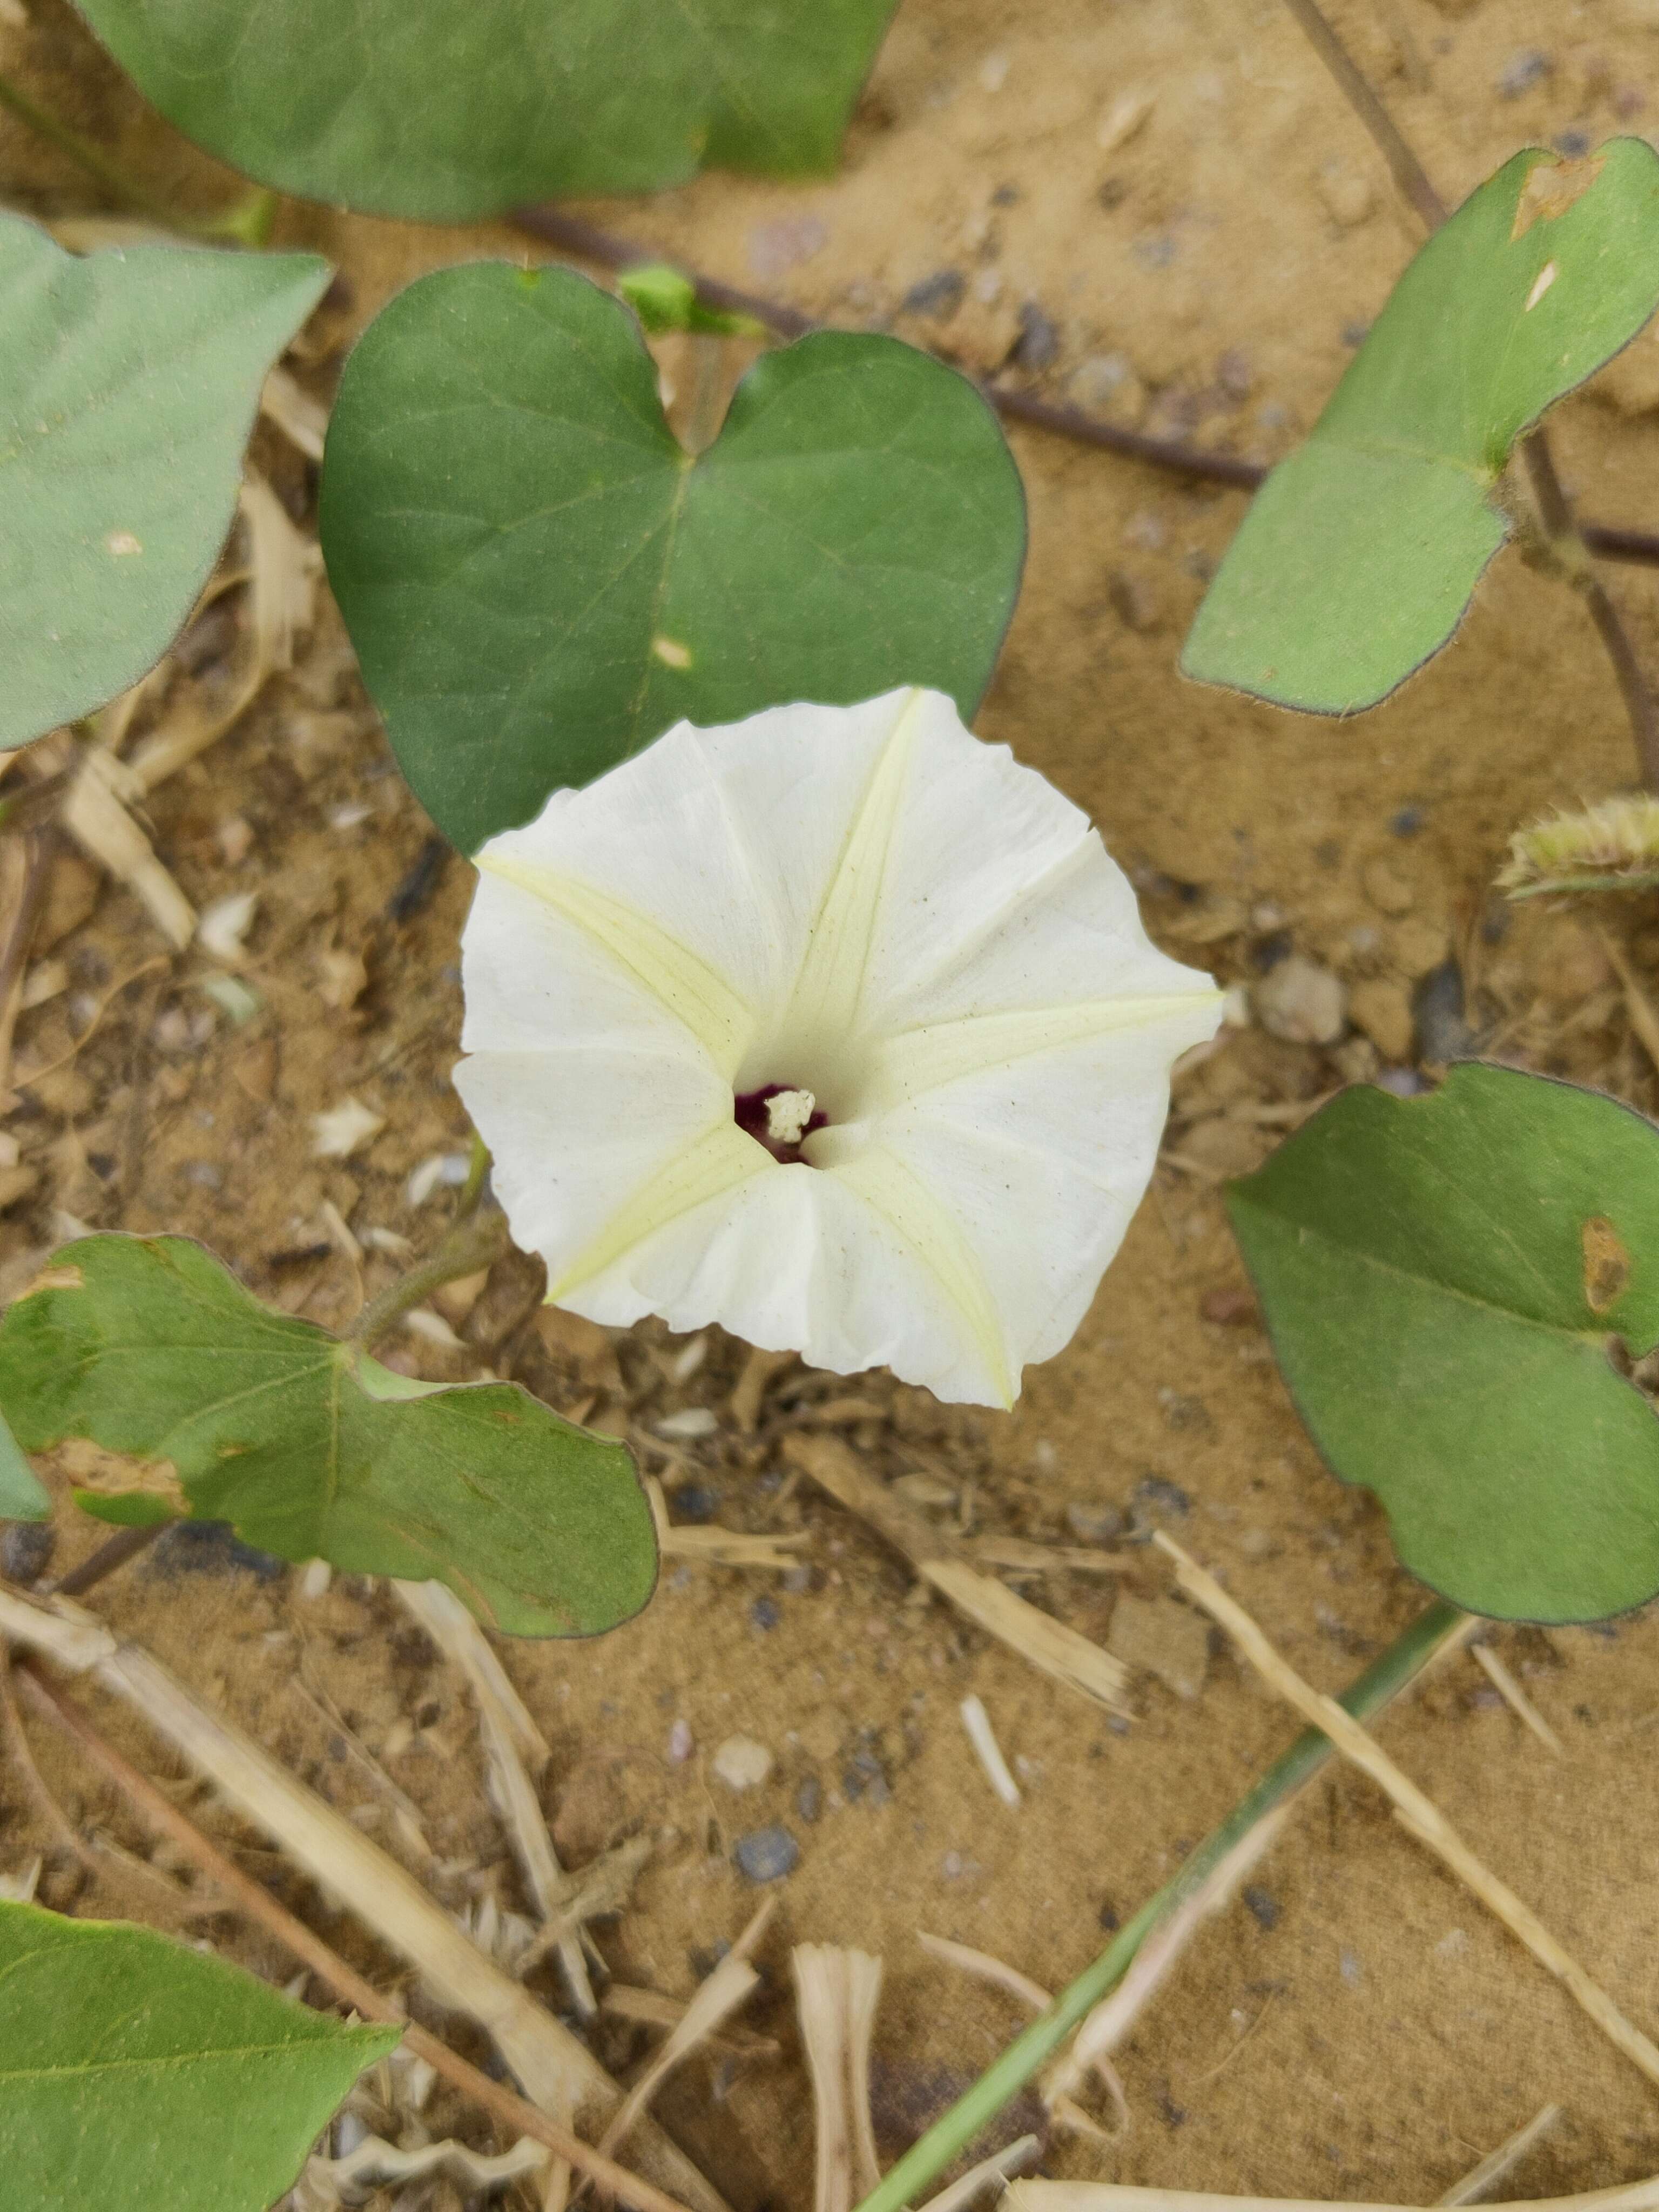 Image of Obscure Morning Glory